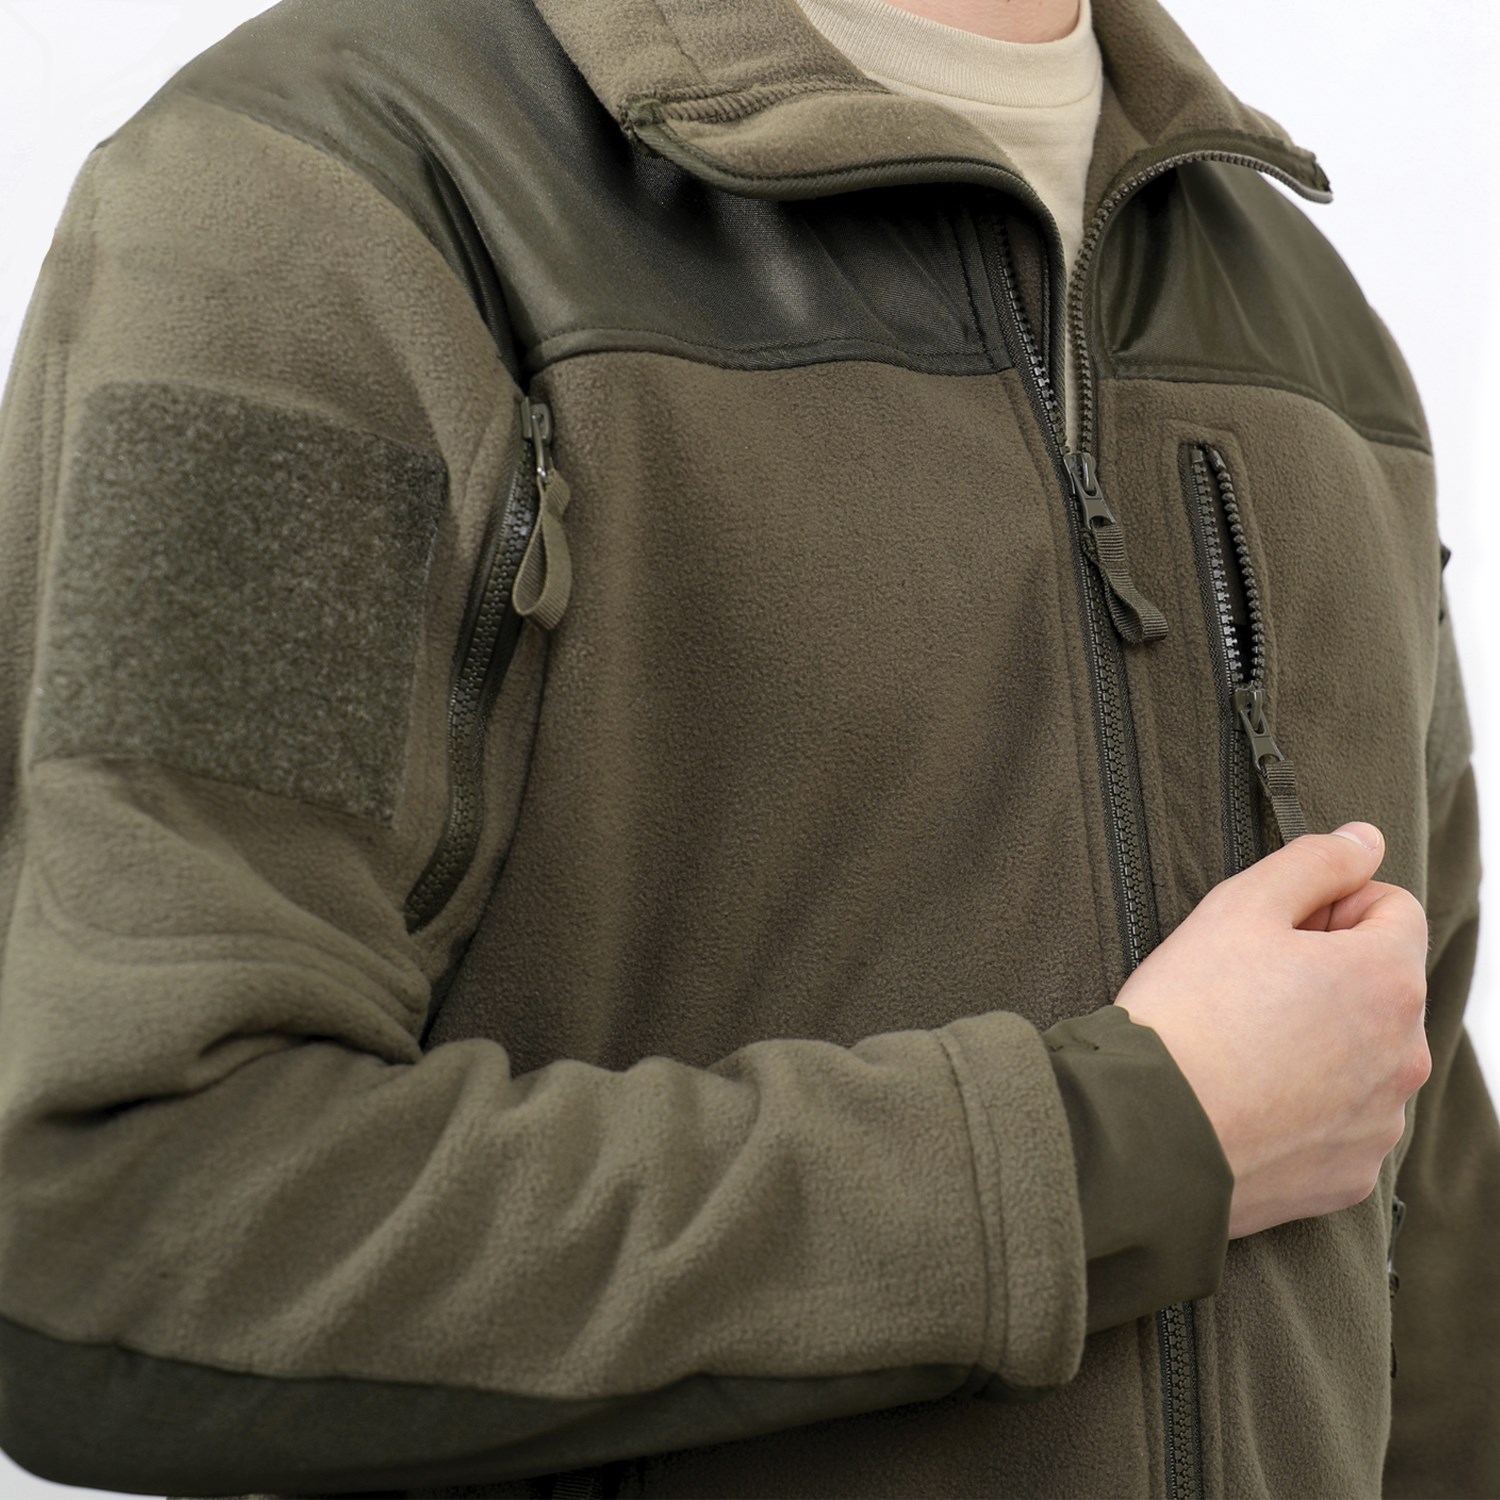 Fleece jacket SPEC OPS OLIVE DRAB ROTHCO 96675 L-11